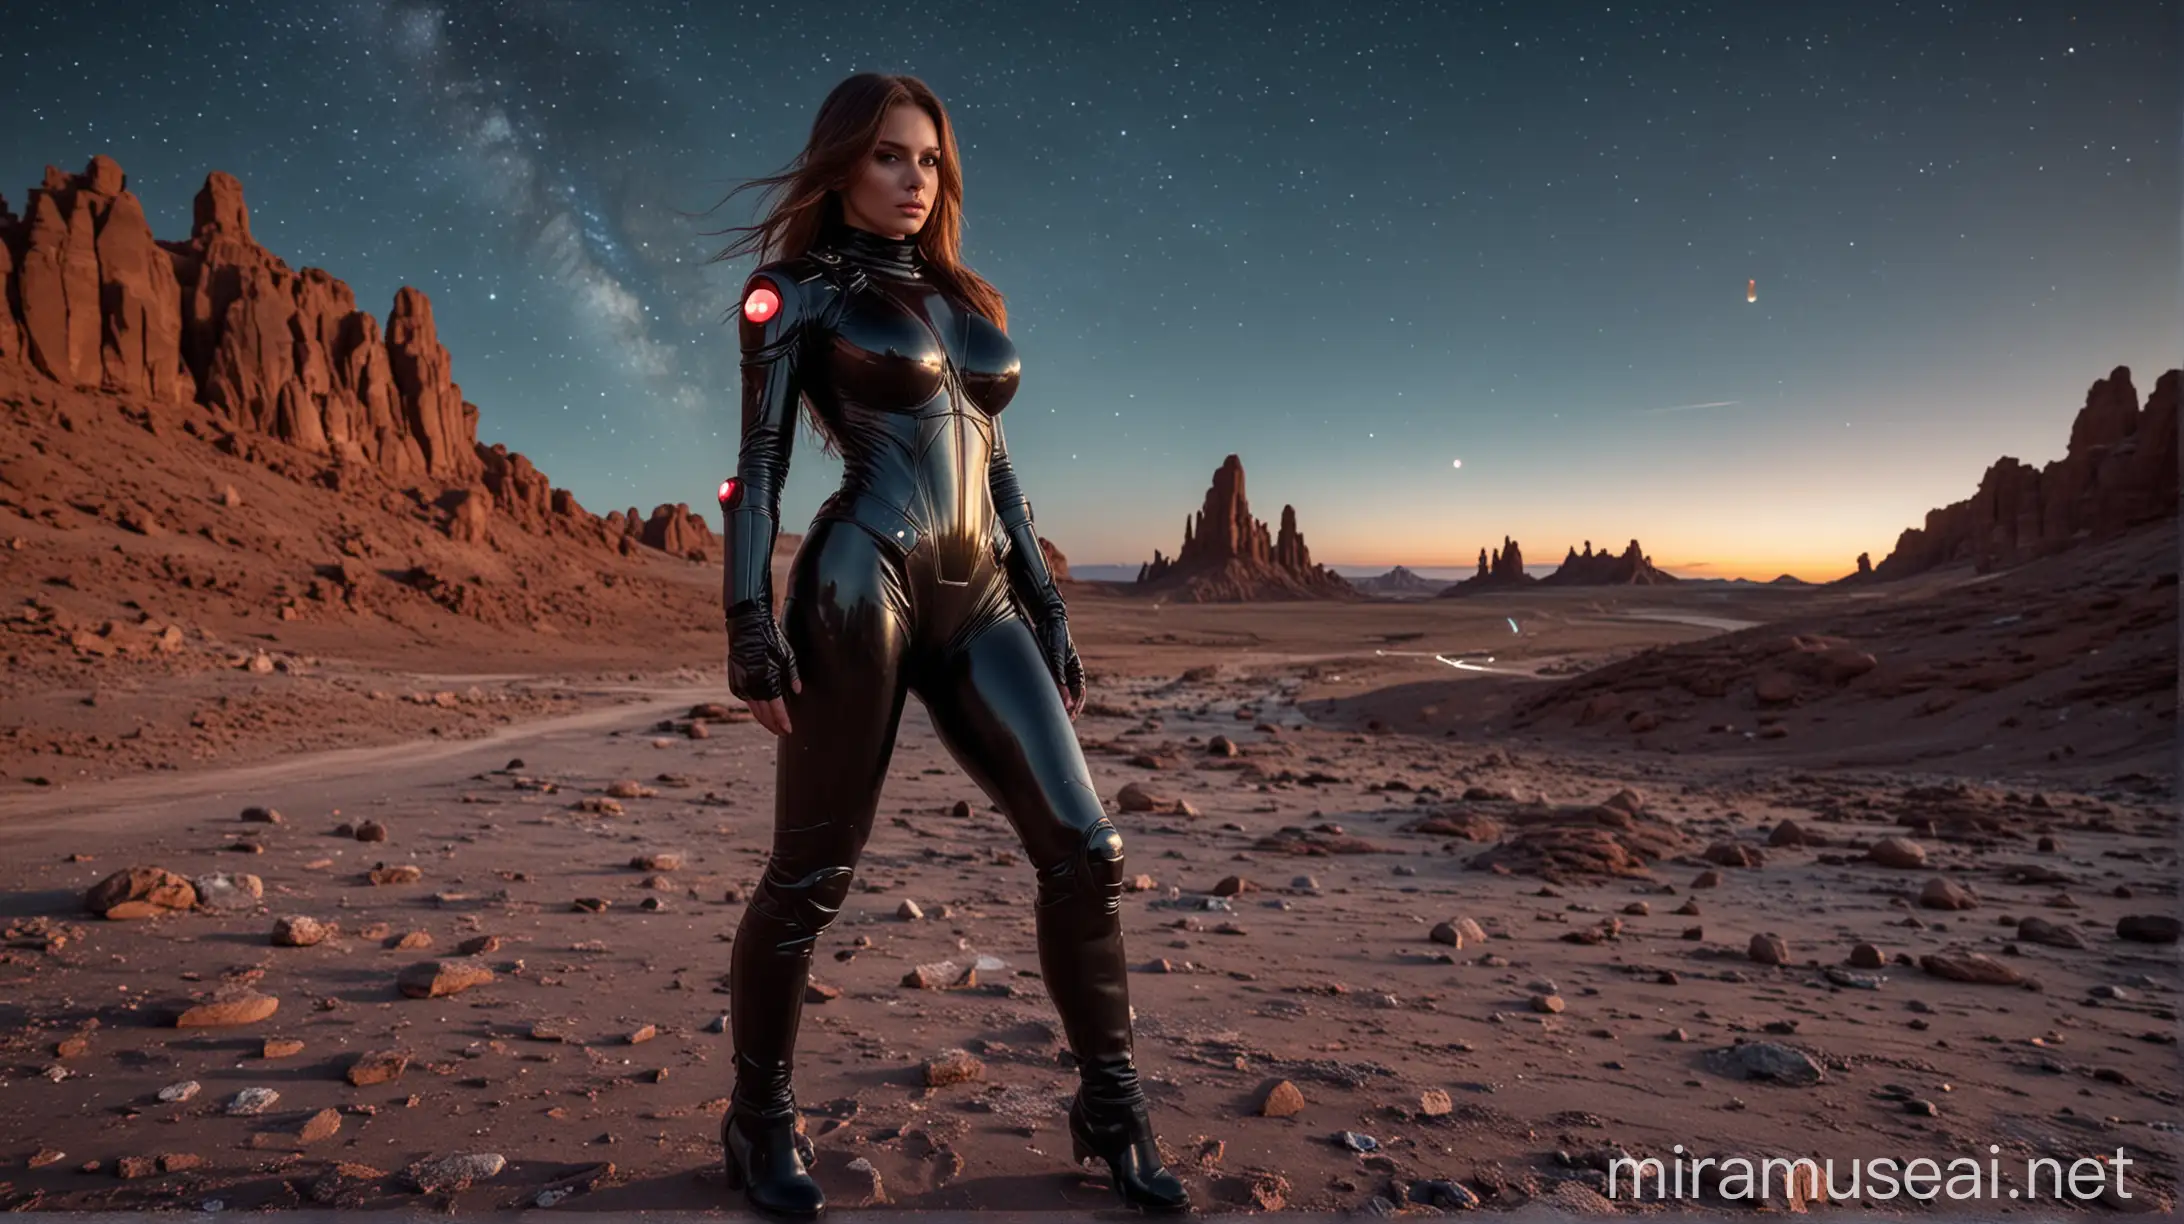 sexy soviet union girl, slim, long hair, wild hair, full body, fitness model, big boobs, wide hips, huge tits, tight spacesuit, armored spacesuit, black shining spacesuit, small colorful glowing parts on spacesuit, sci-fi, night rocky desert, stars in the sky, galaxies, colorful planets